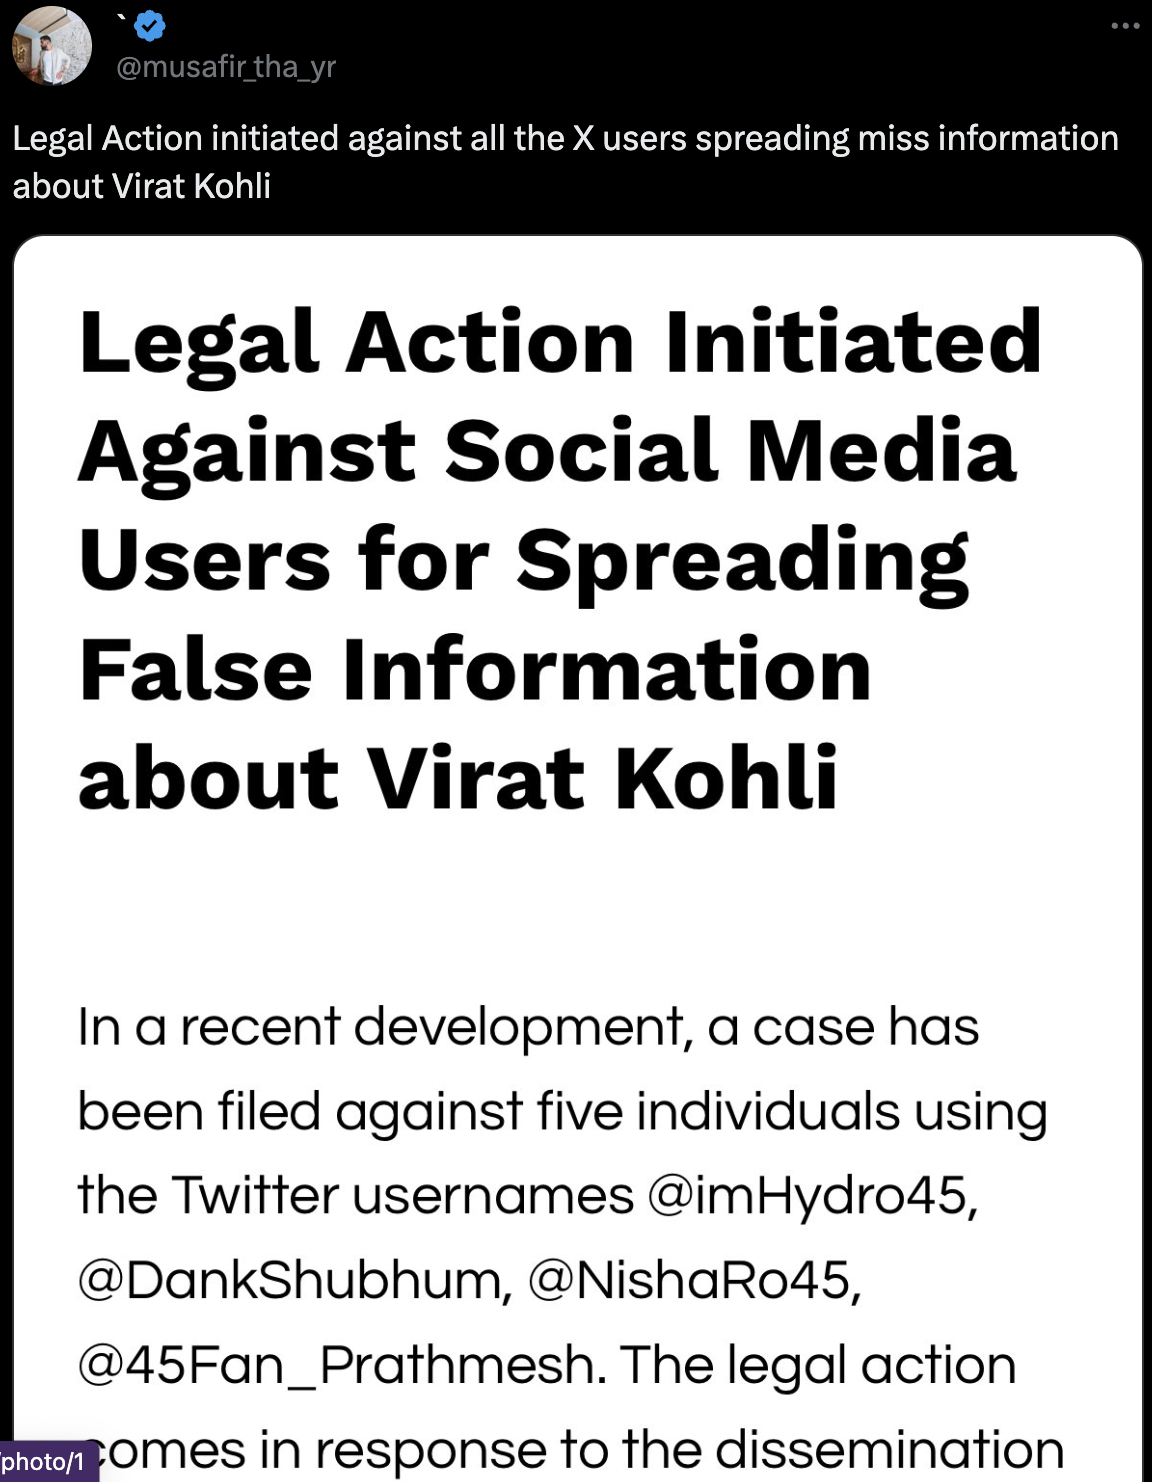 Fact Check: Has Legal Action Been Initiated Against All The X Users Spreading Miss Information About Virat Kohli?